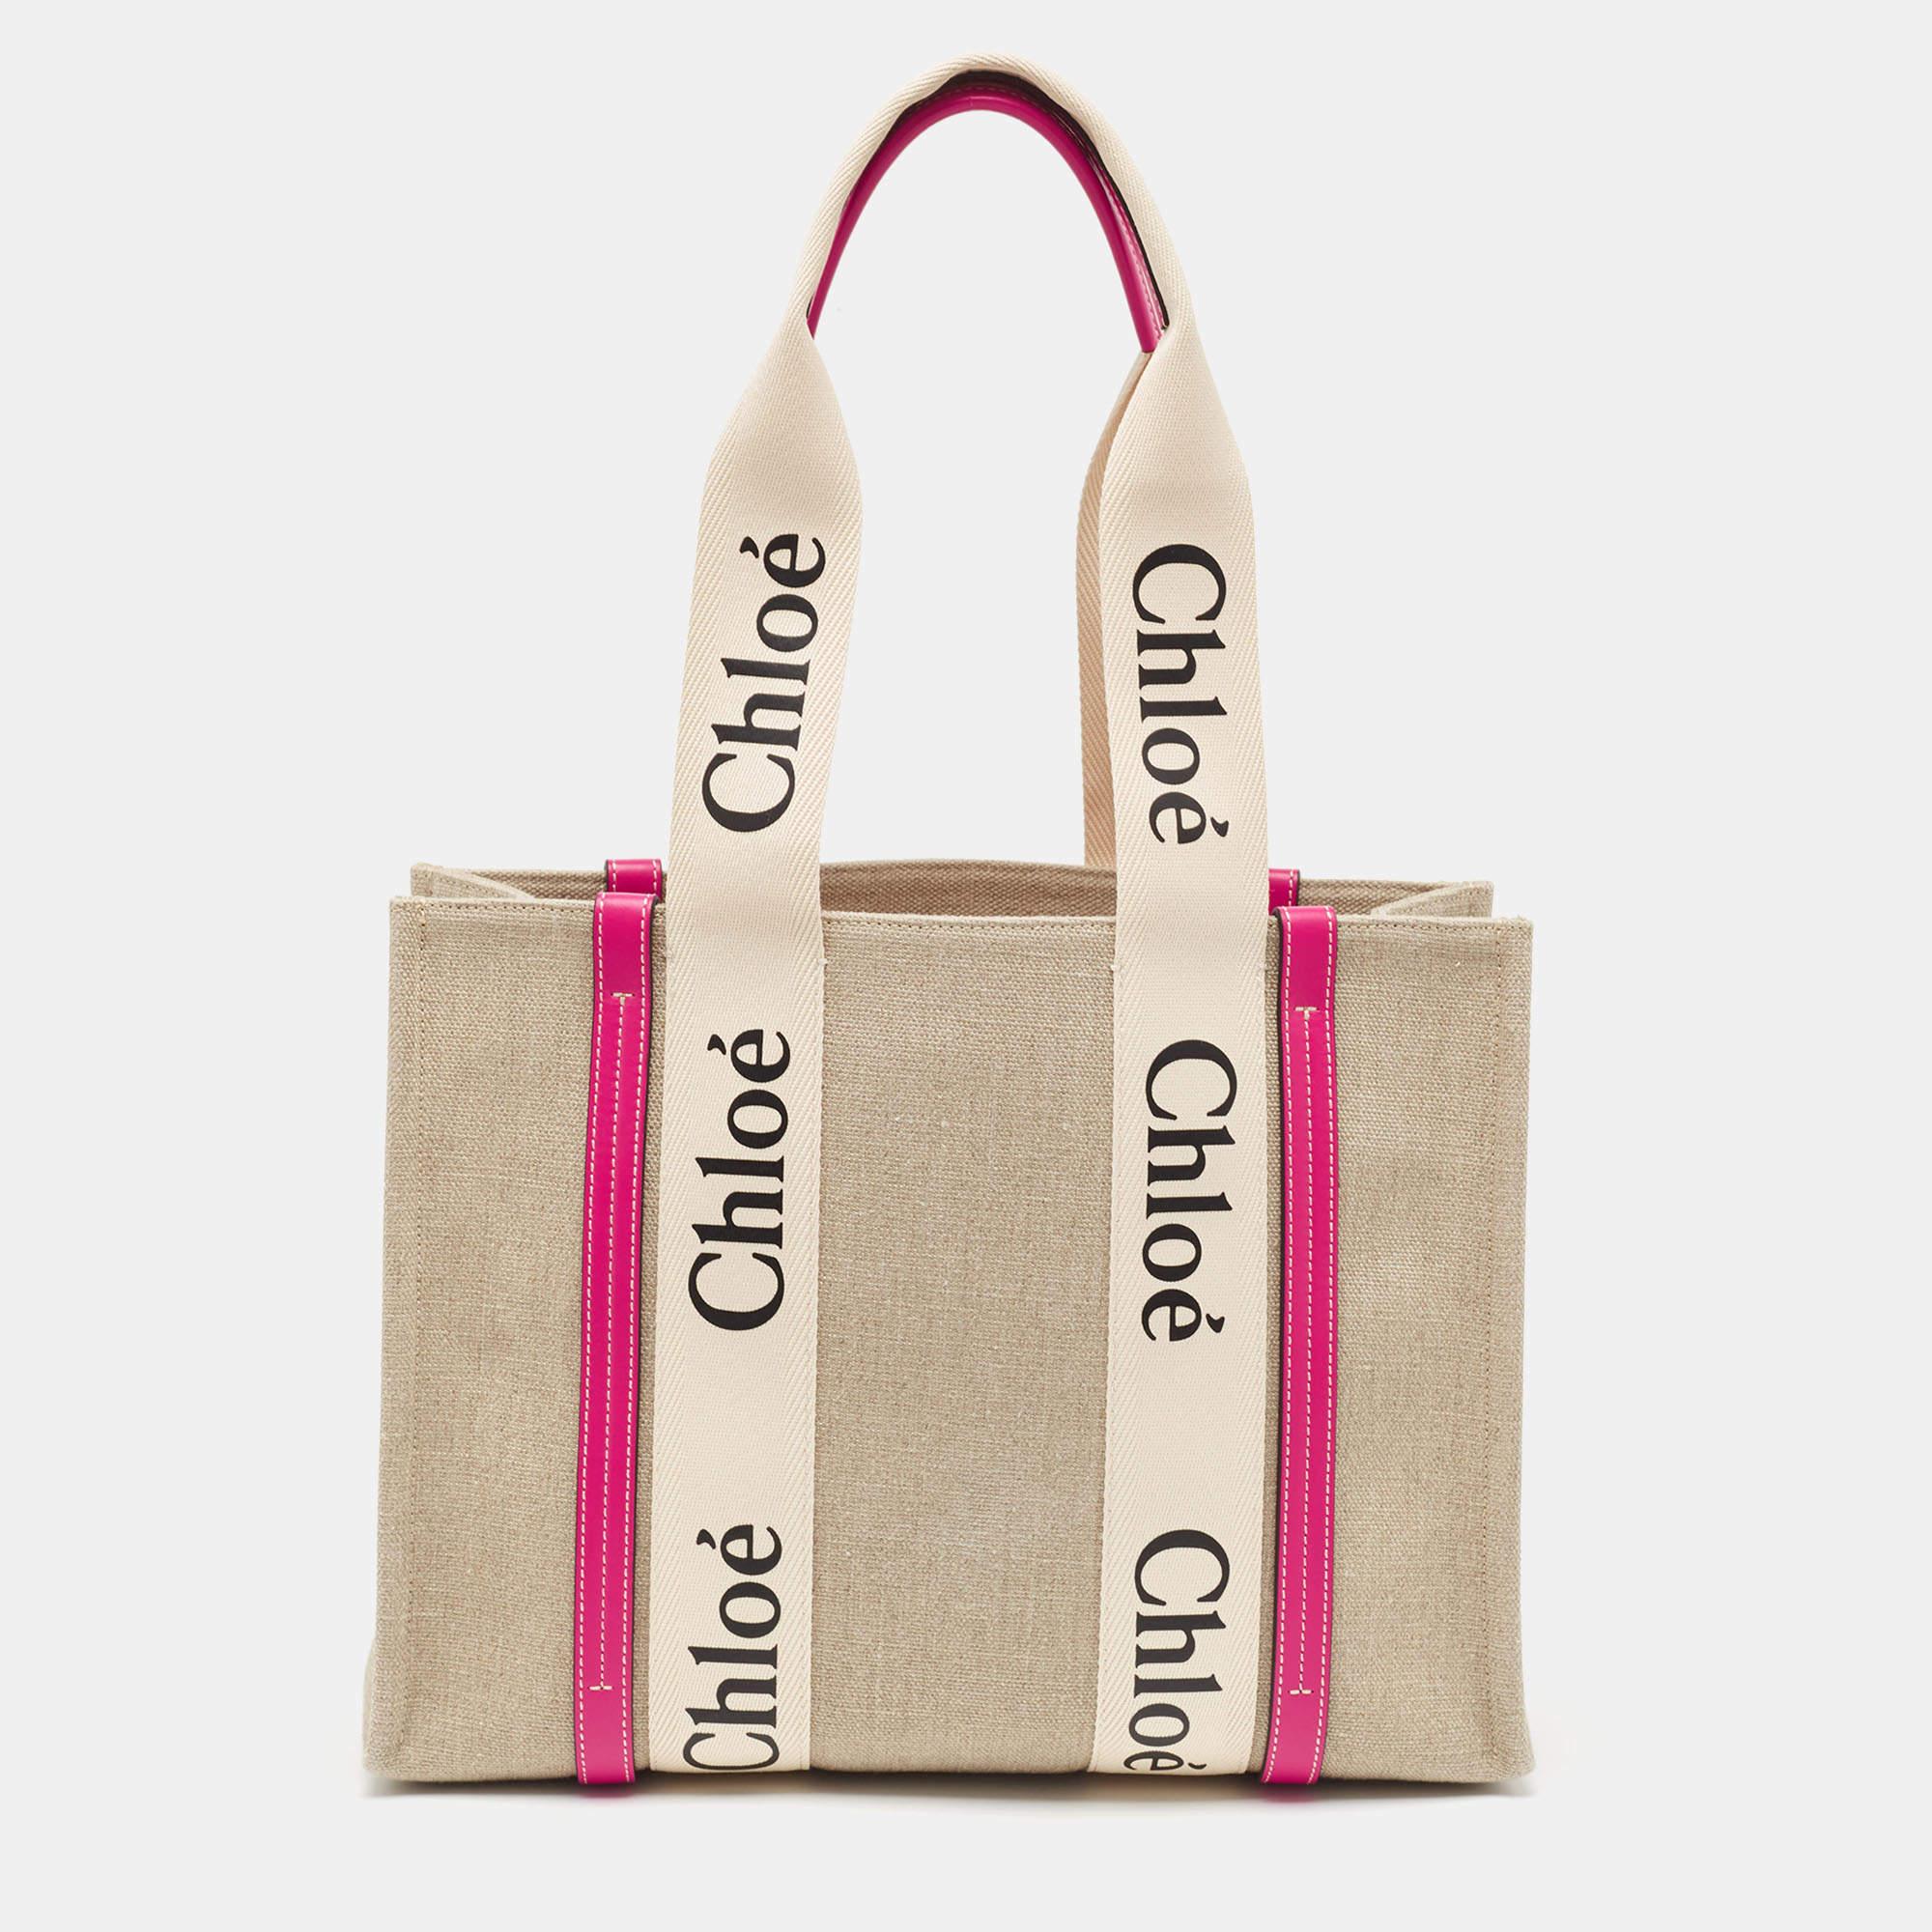 If you like traveling light, then this Chloe Woody tote is an ideal option for you. It is the ultimate favorite of the fashion elite because of its versatility and classy appeal. Created from canvas and leather, it exhibits brand-detailed stripes on